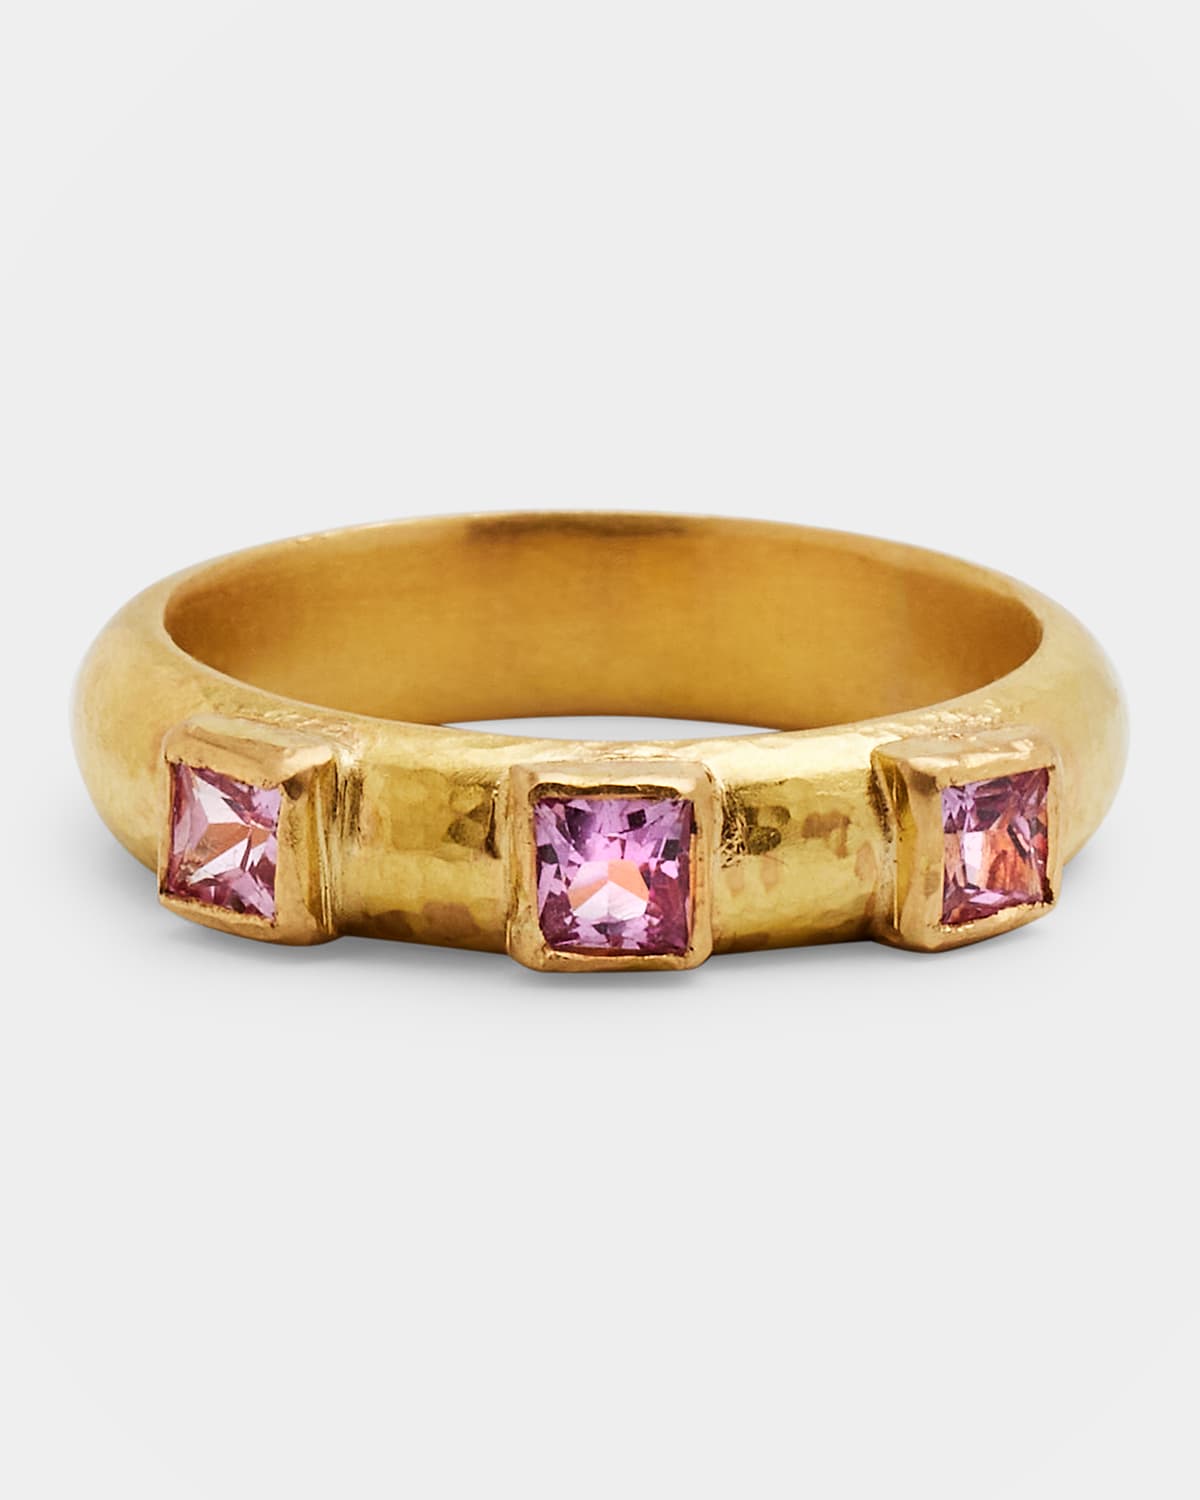 19K Square Faceted Pink Sapphire Stack Ring, Size 6.5